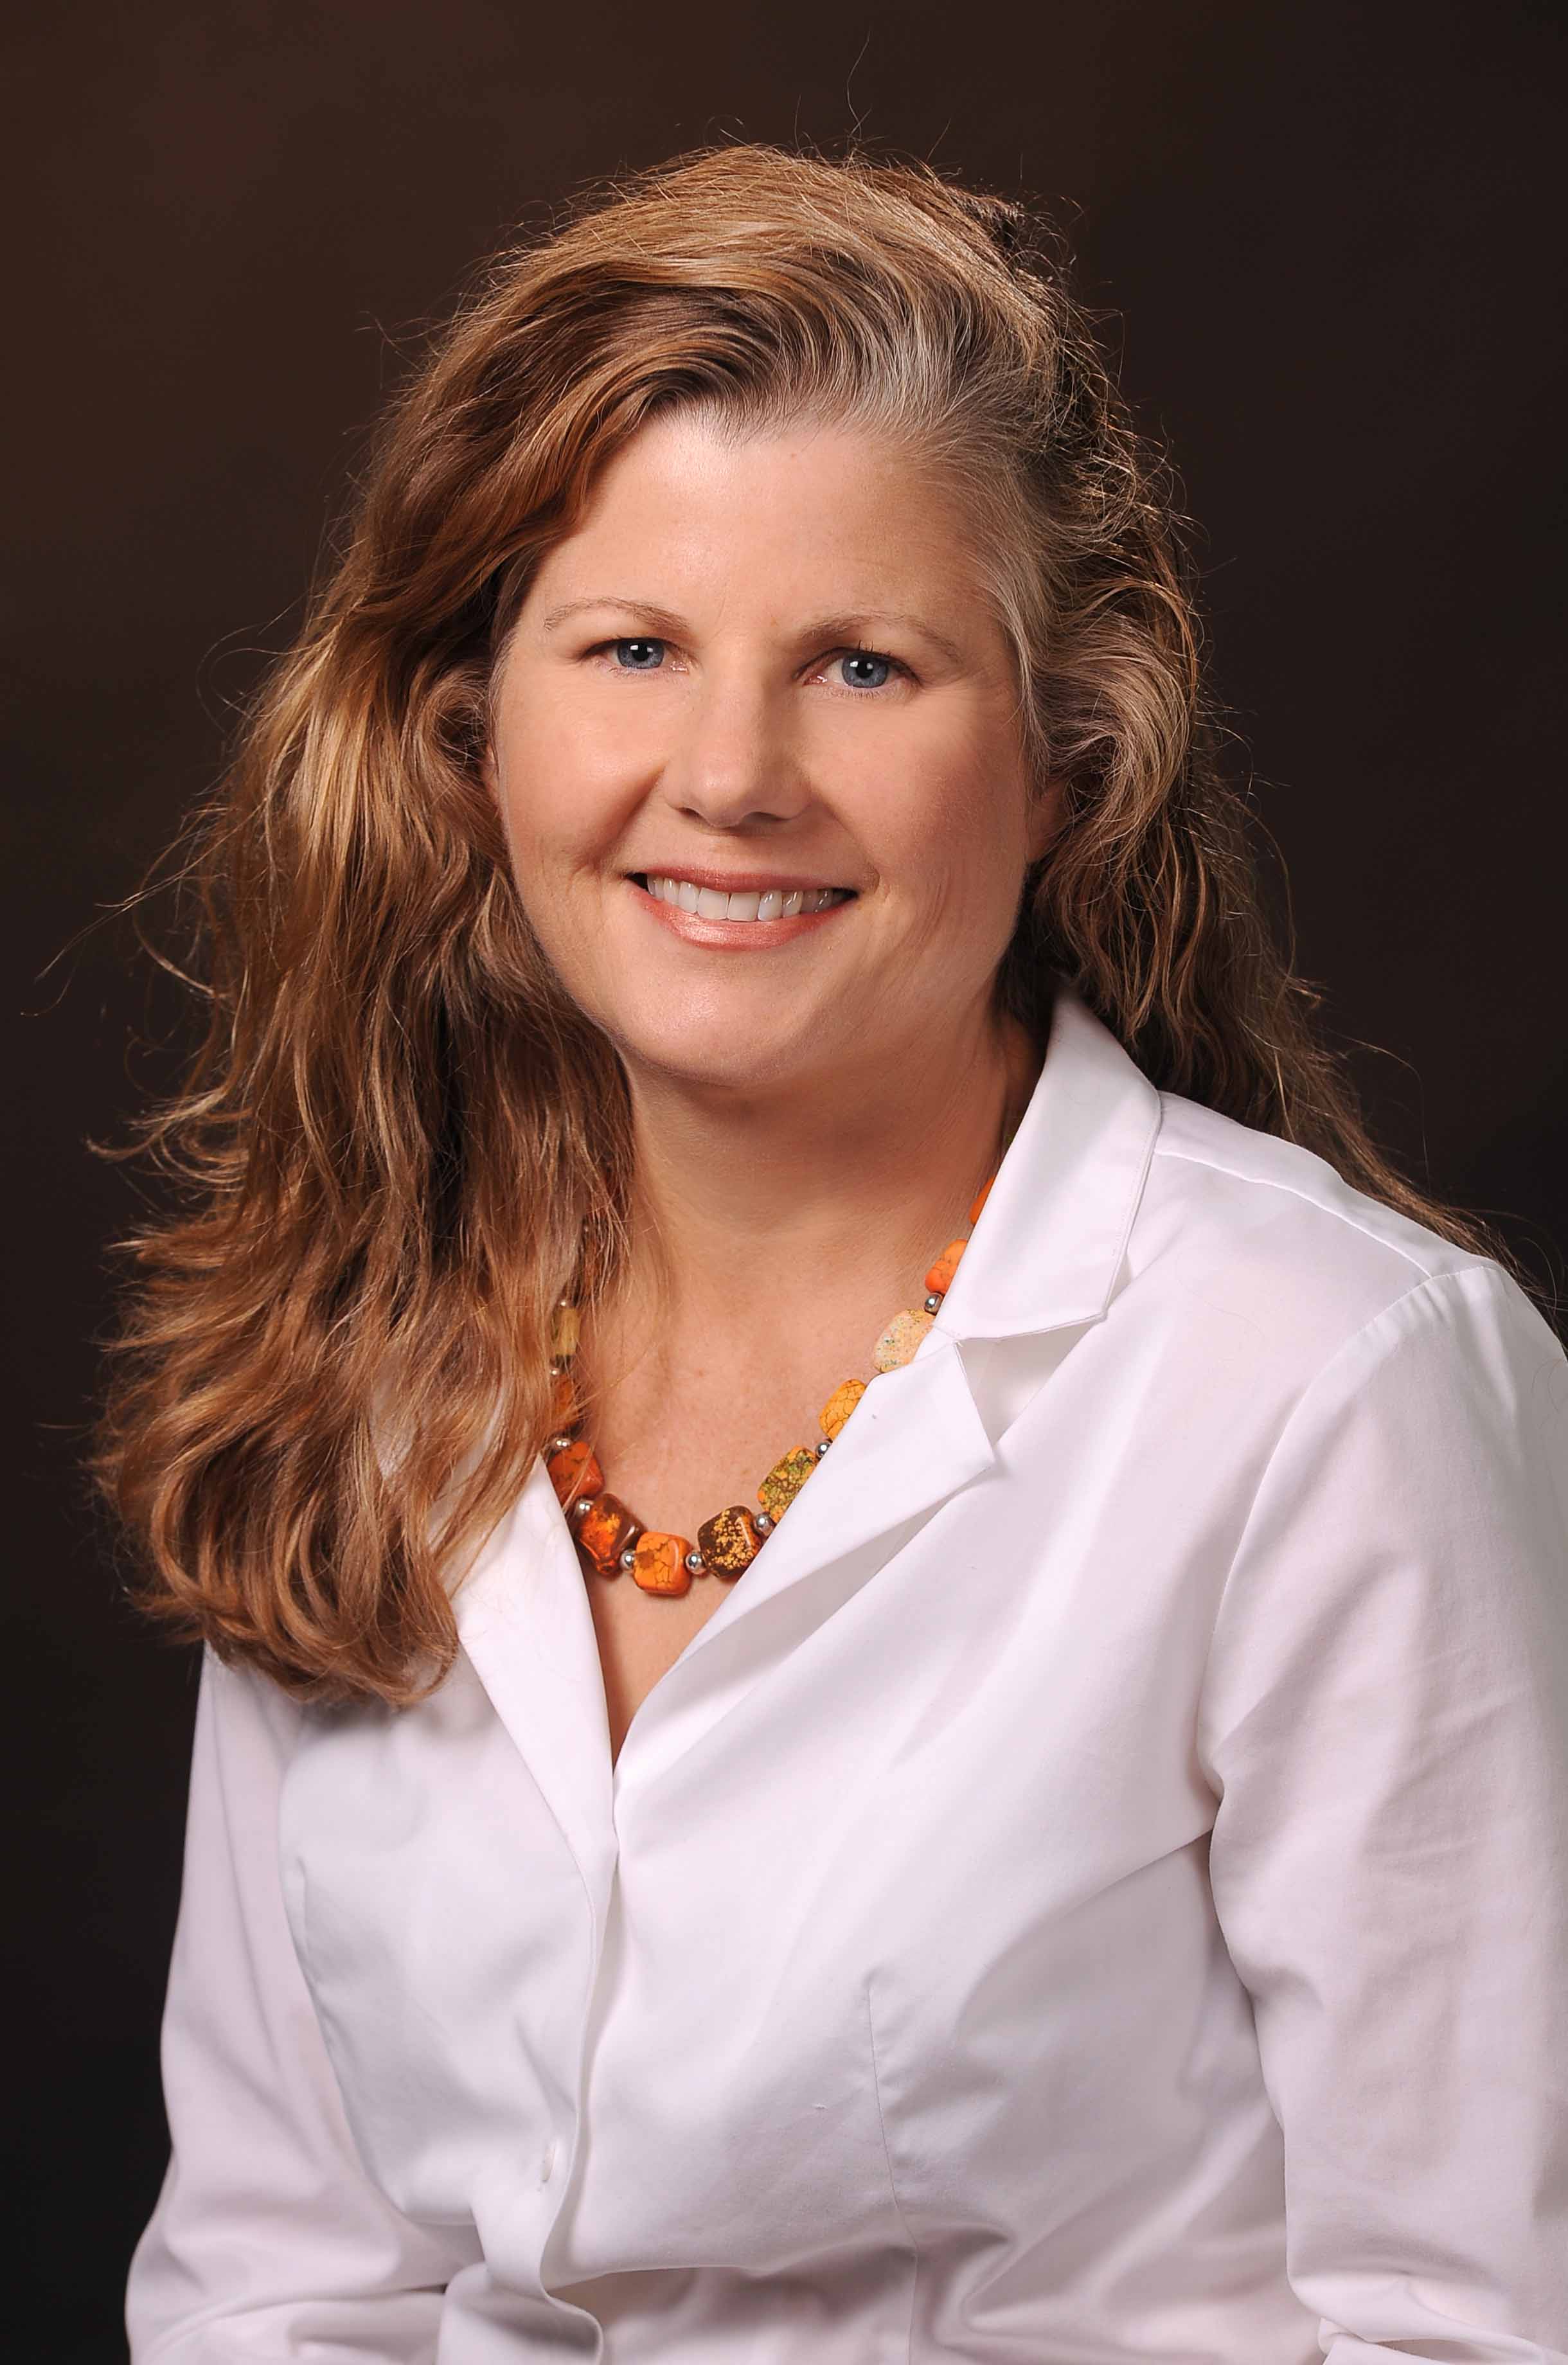 After a nationwide search, the University of Georgia College of Agricultural and Environmental Sciences has named Kathleen (Kay) D. Kelsey head of the college's Department of Agricultural Leadership, Education and Communication.